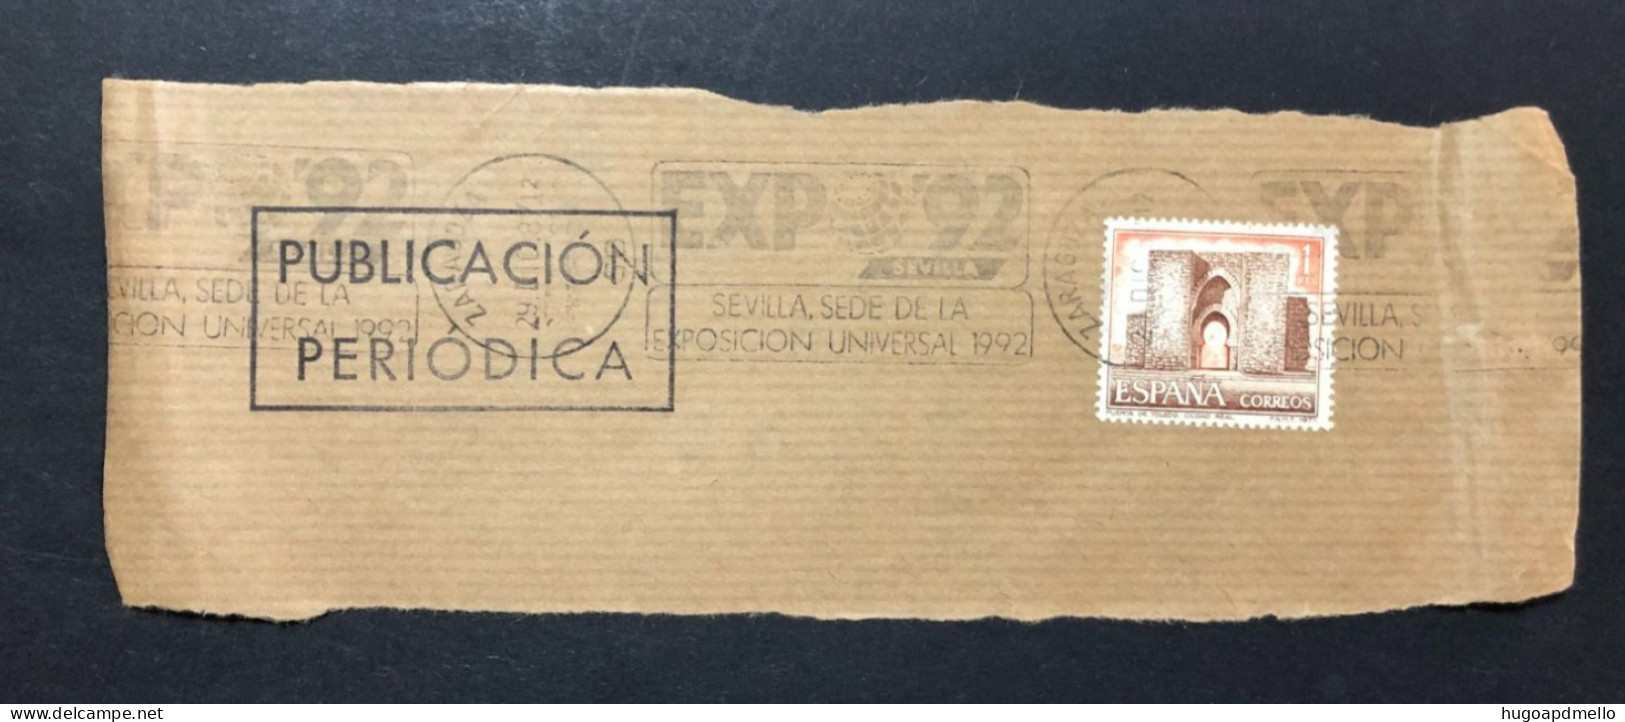 SPAIN, Fragment With Special Cancellation « EXPO '92 », « ZARAGOZA  Postmark », 1987 - 1992 – Séville (Espagne)